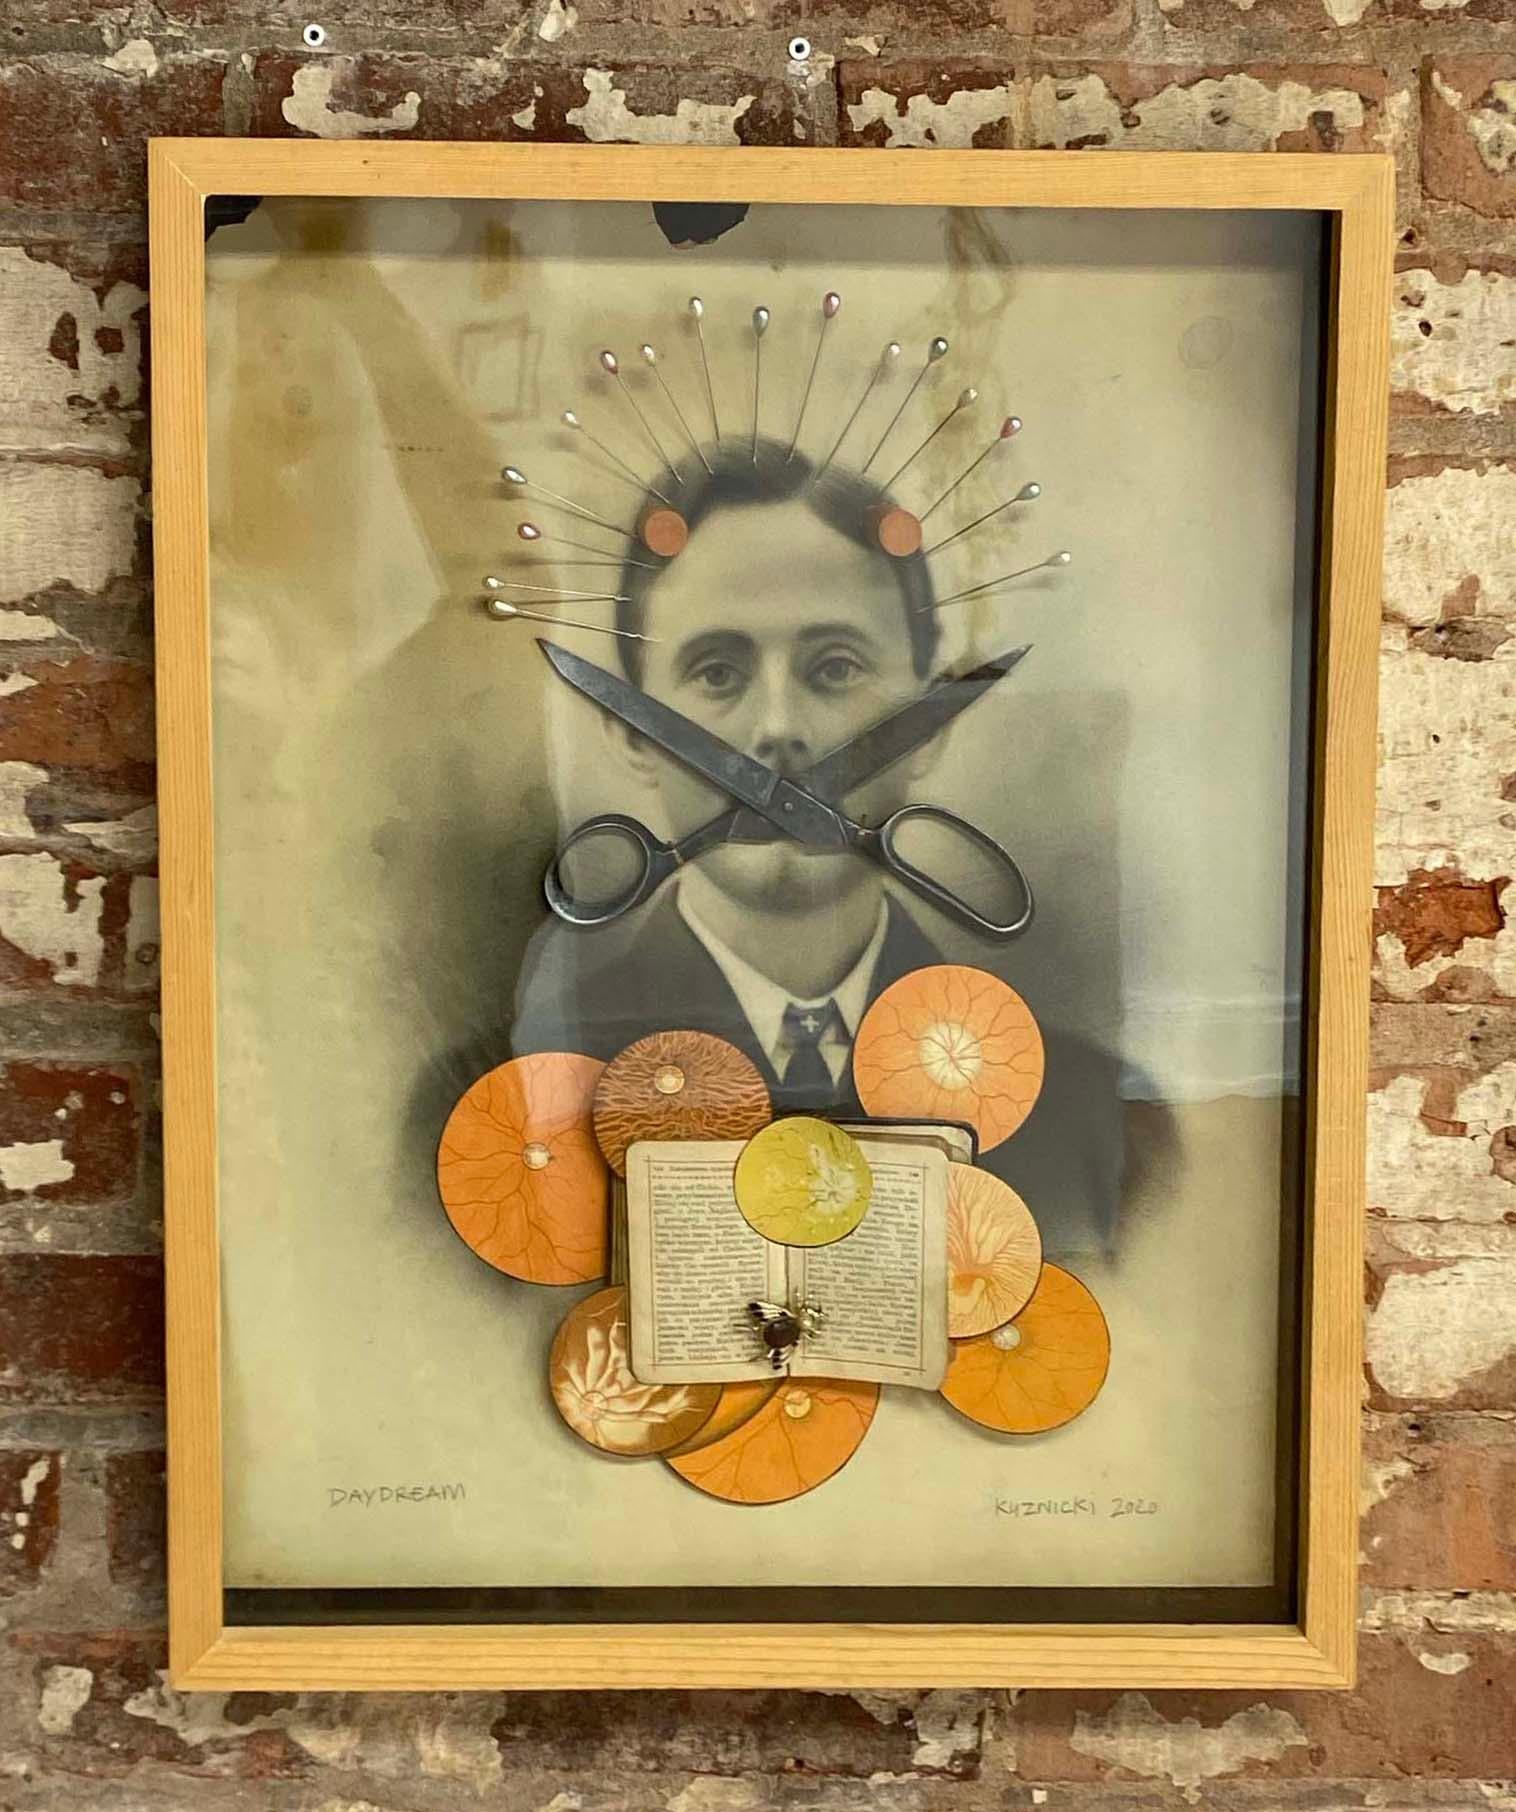 One of a kind mixed-media collage on canvas by Philip Kuznicki from the Spirit exhibition. Comes in its original frame.
Born in Dunkirk NY, Kuznicki started his career working for artists such as Zaha Hadid and Ulysses Pagliari. His work is also a